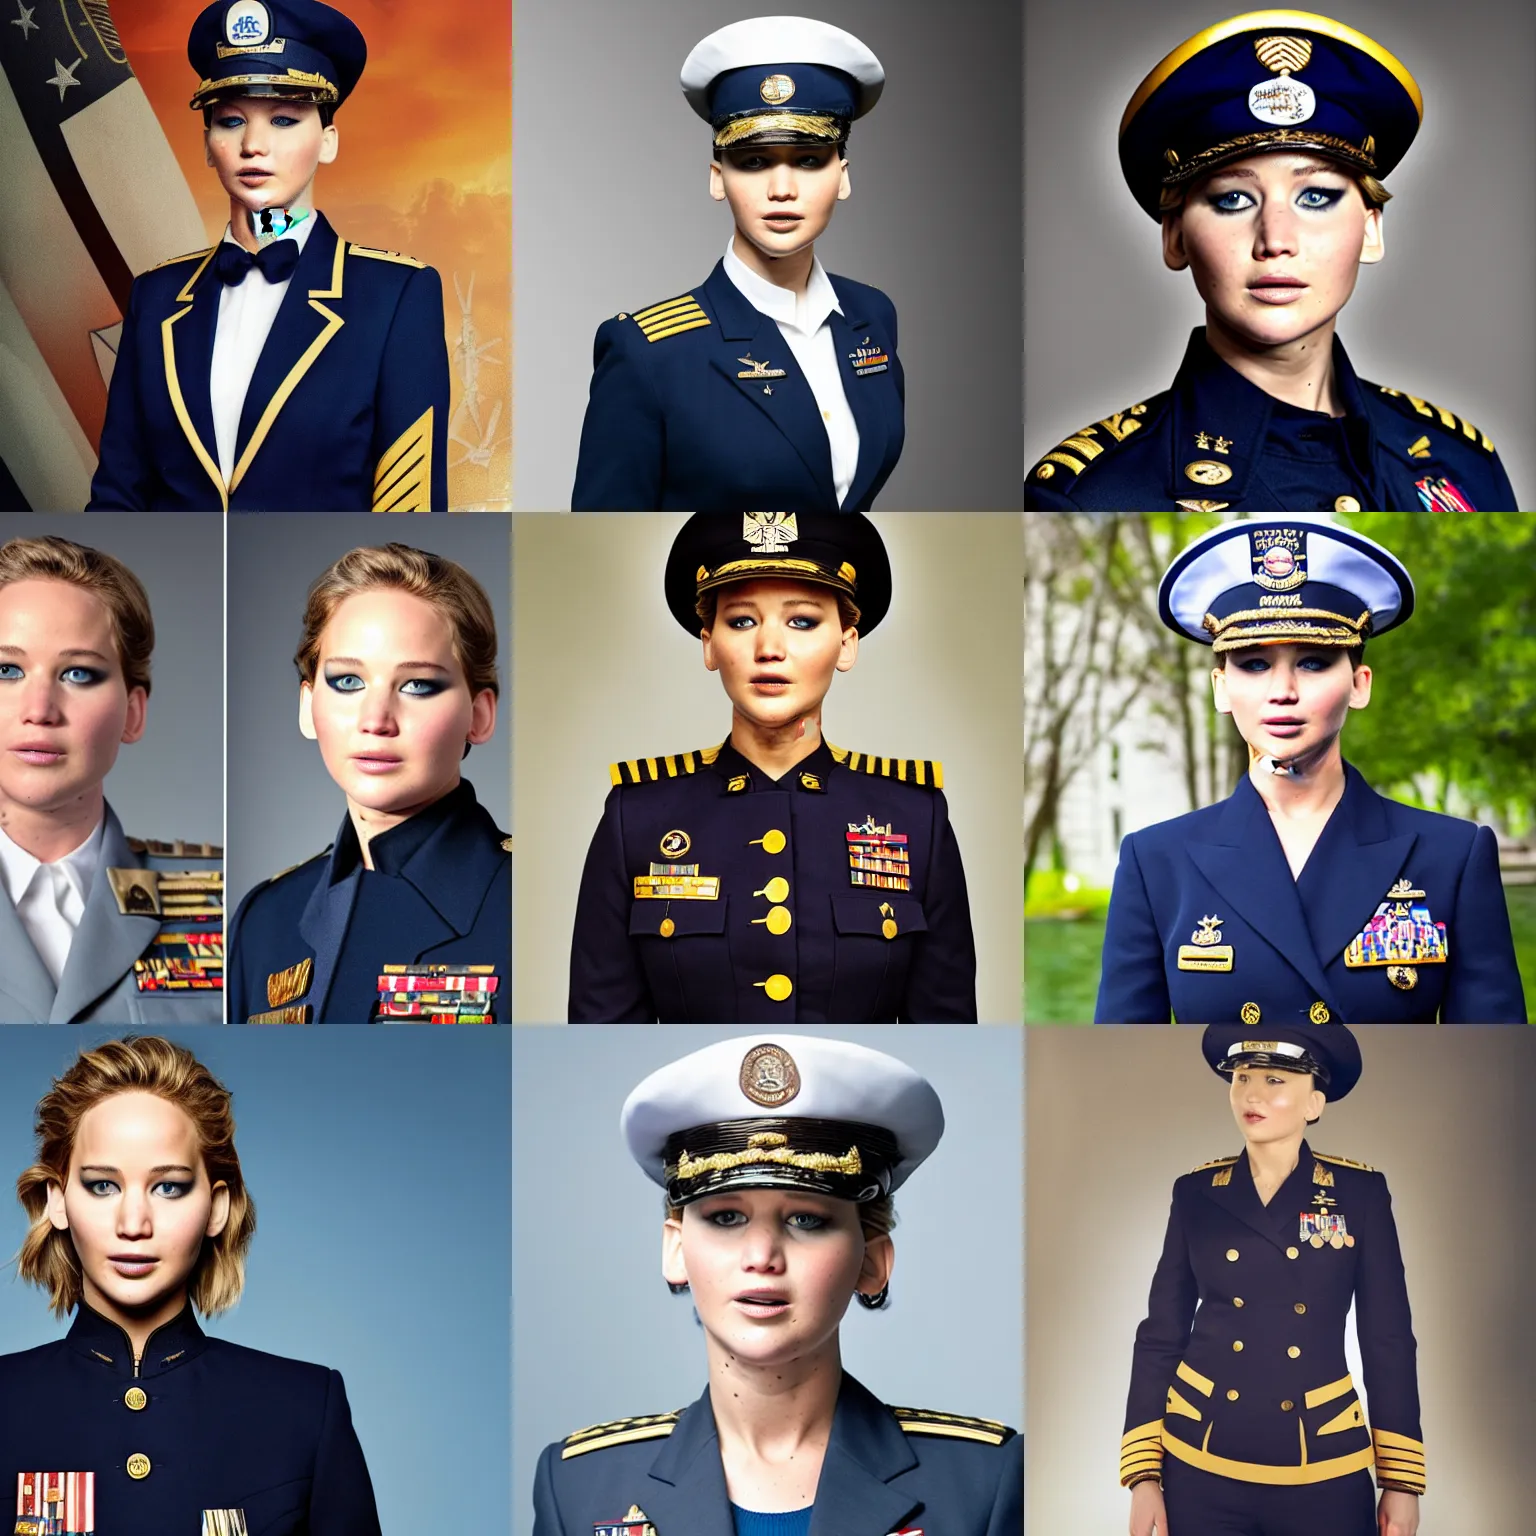 Prompt: Jennifer Lawrence as a Navy Admiral wearing a reefer jacket and peaked cap, photo portrait